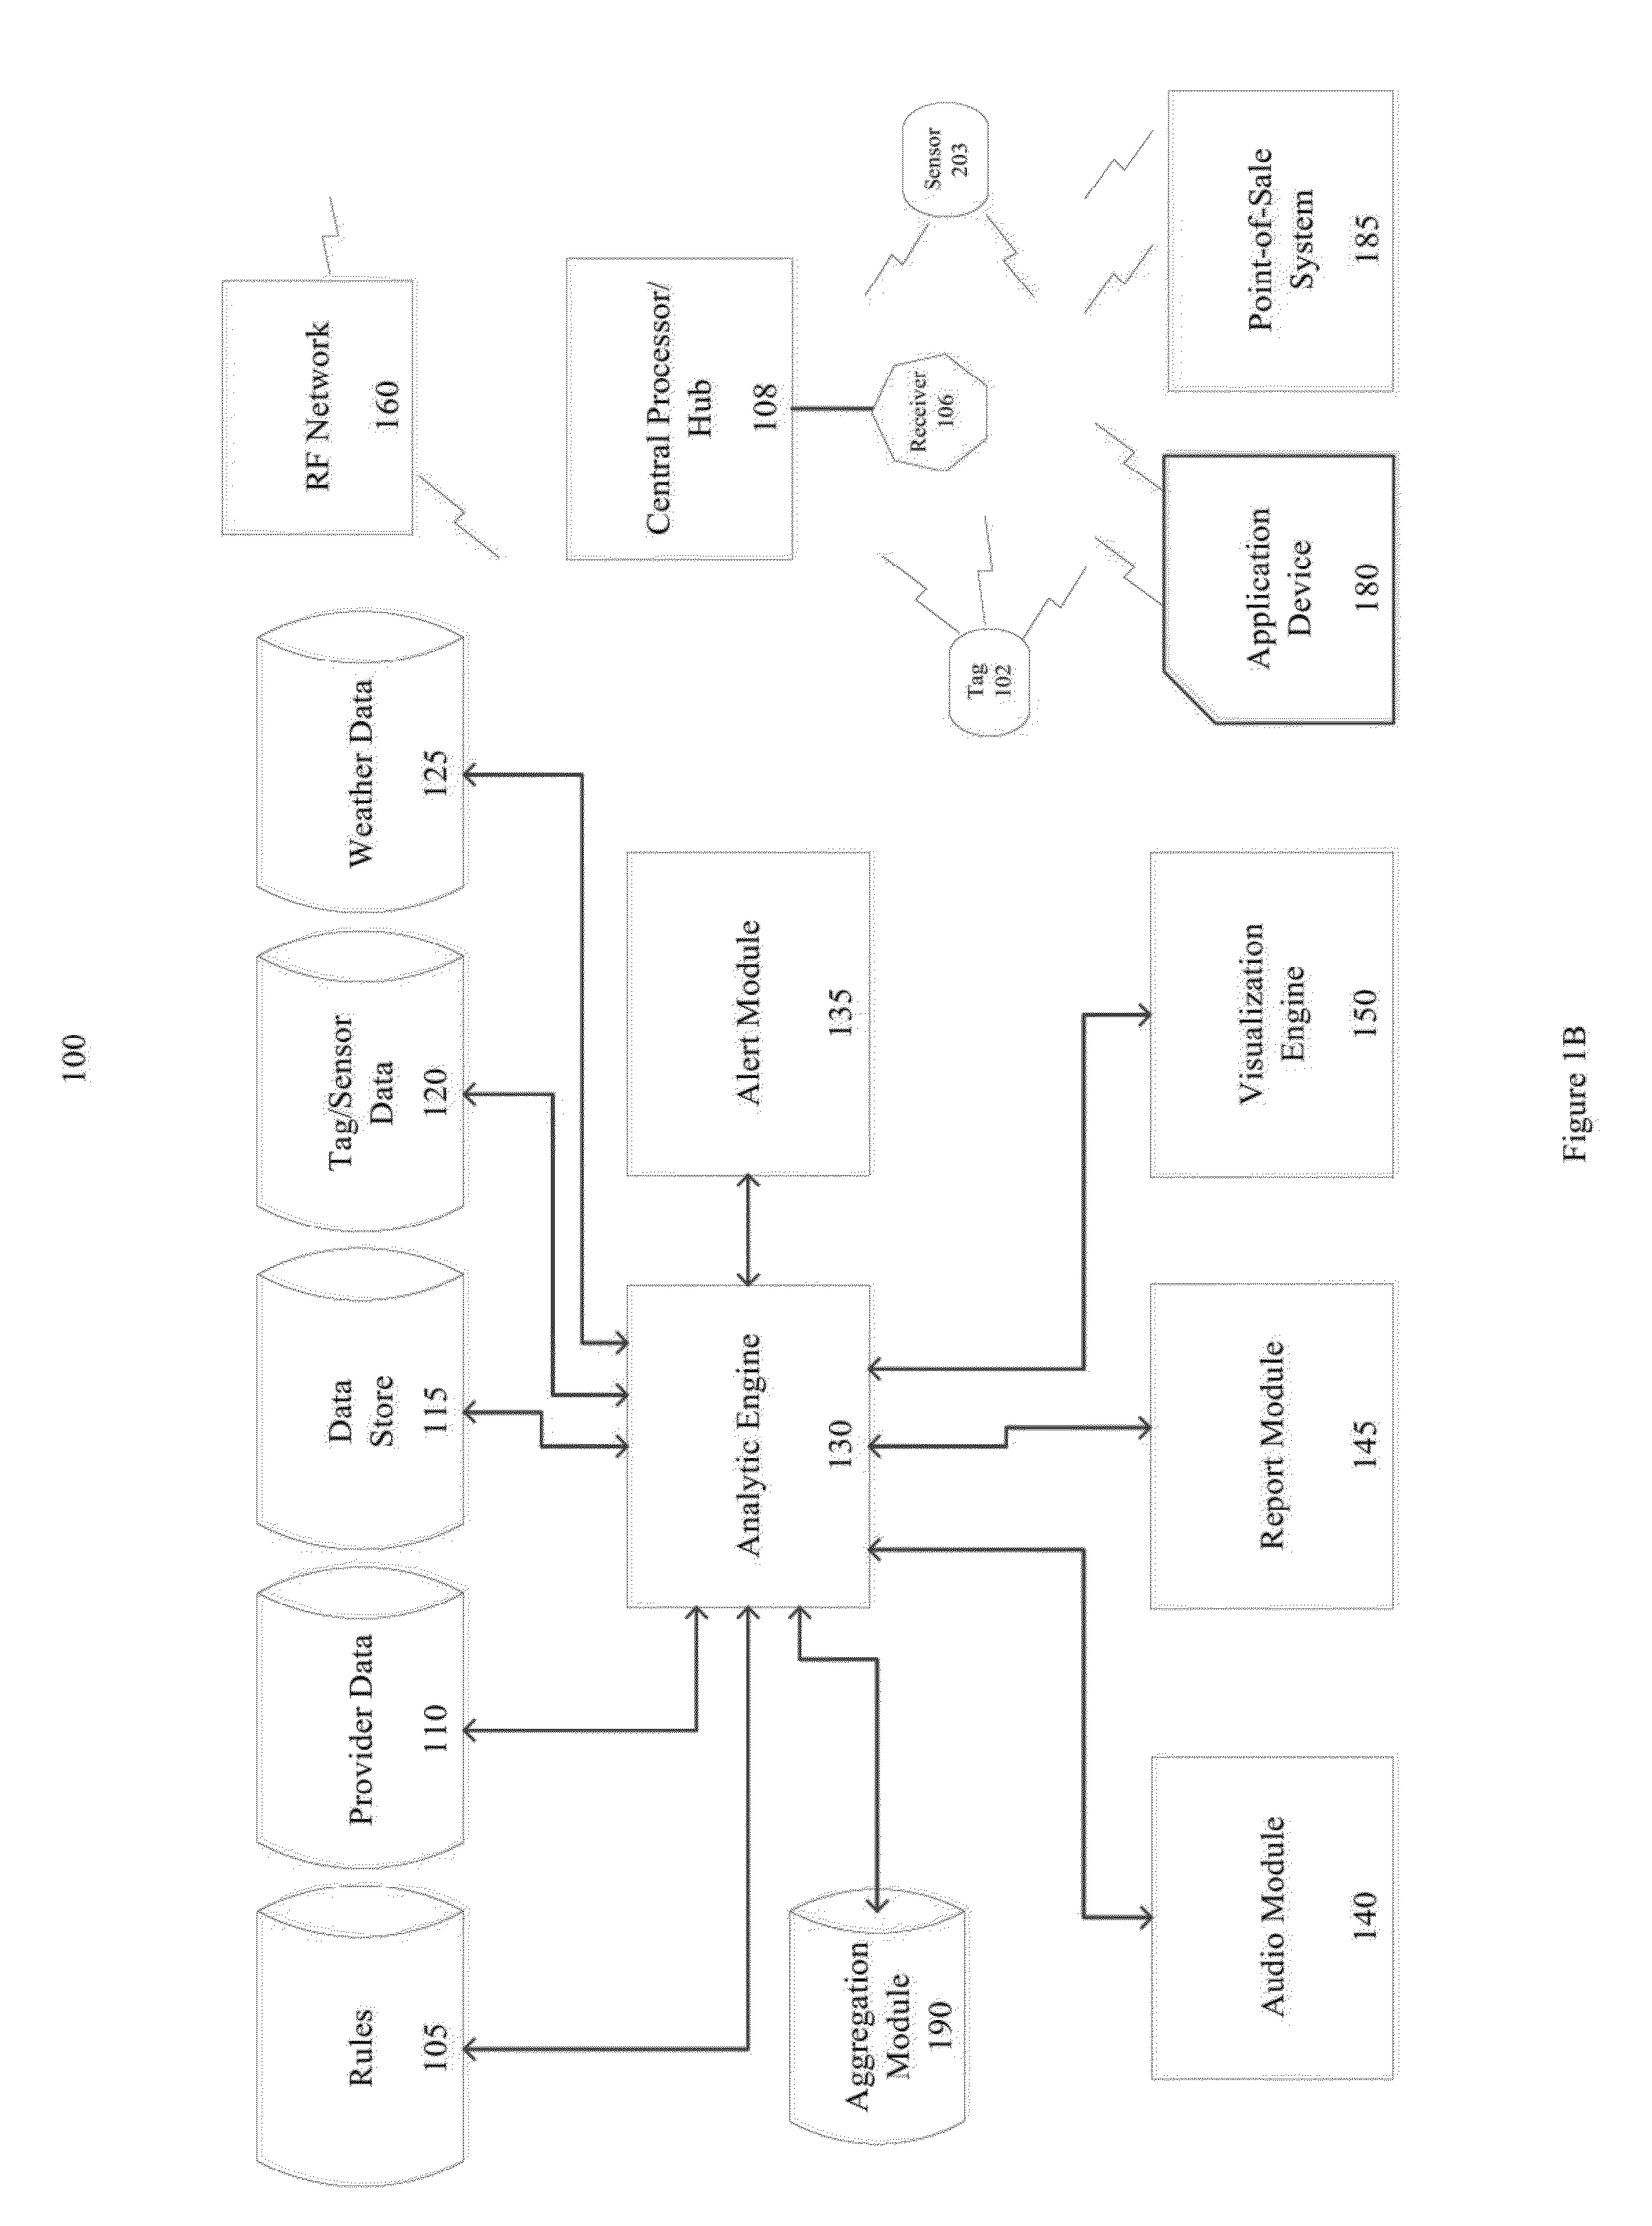 Method, apparatus, and computer program product to ascertain supply and demand analytics and outputting events based on real-time data for proximity and movement of individuals and objects